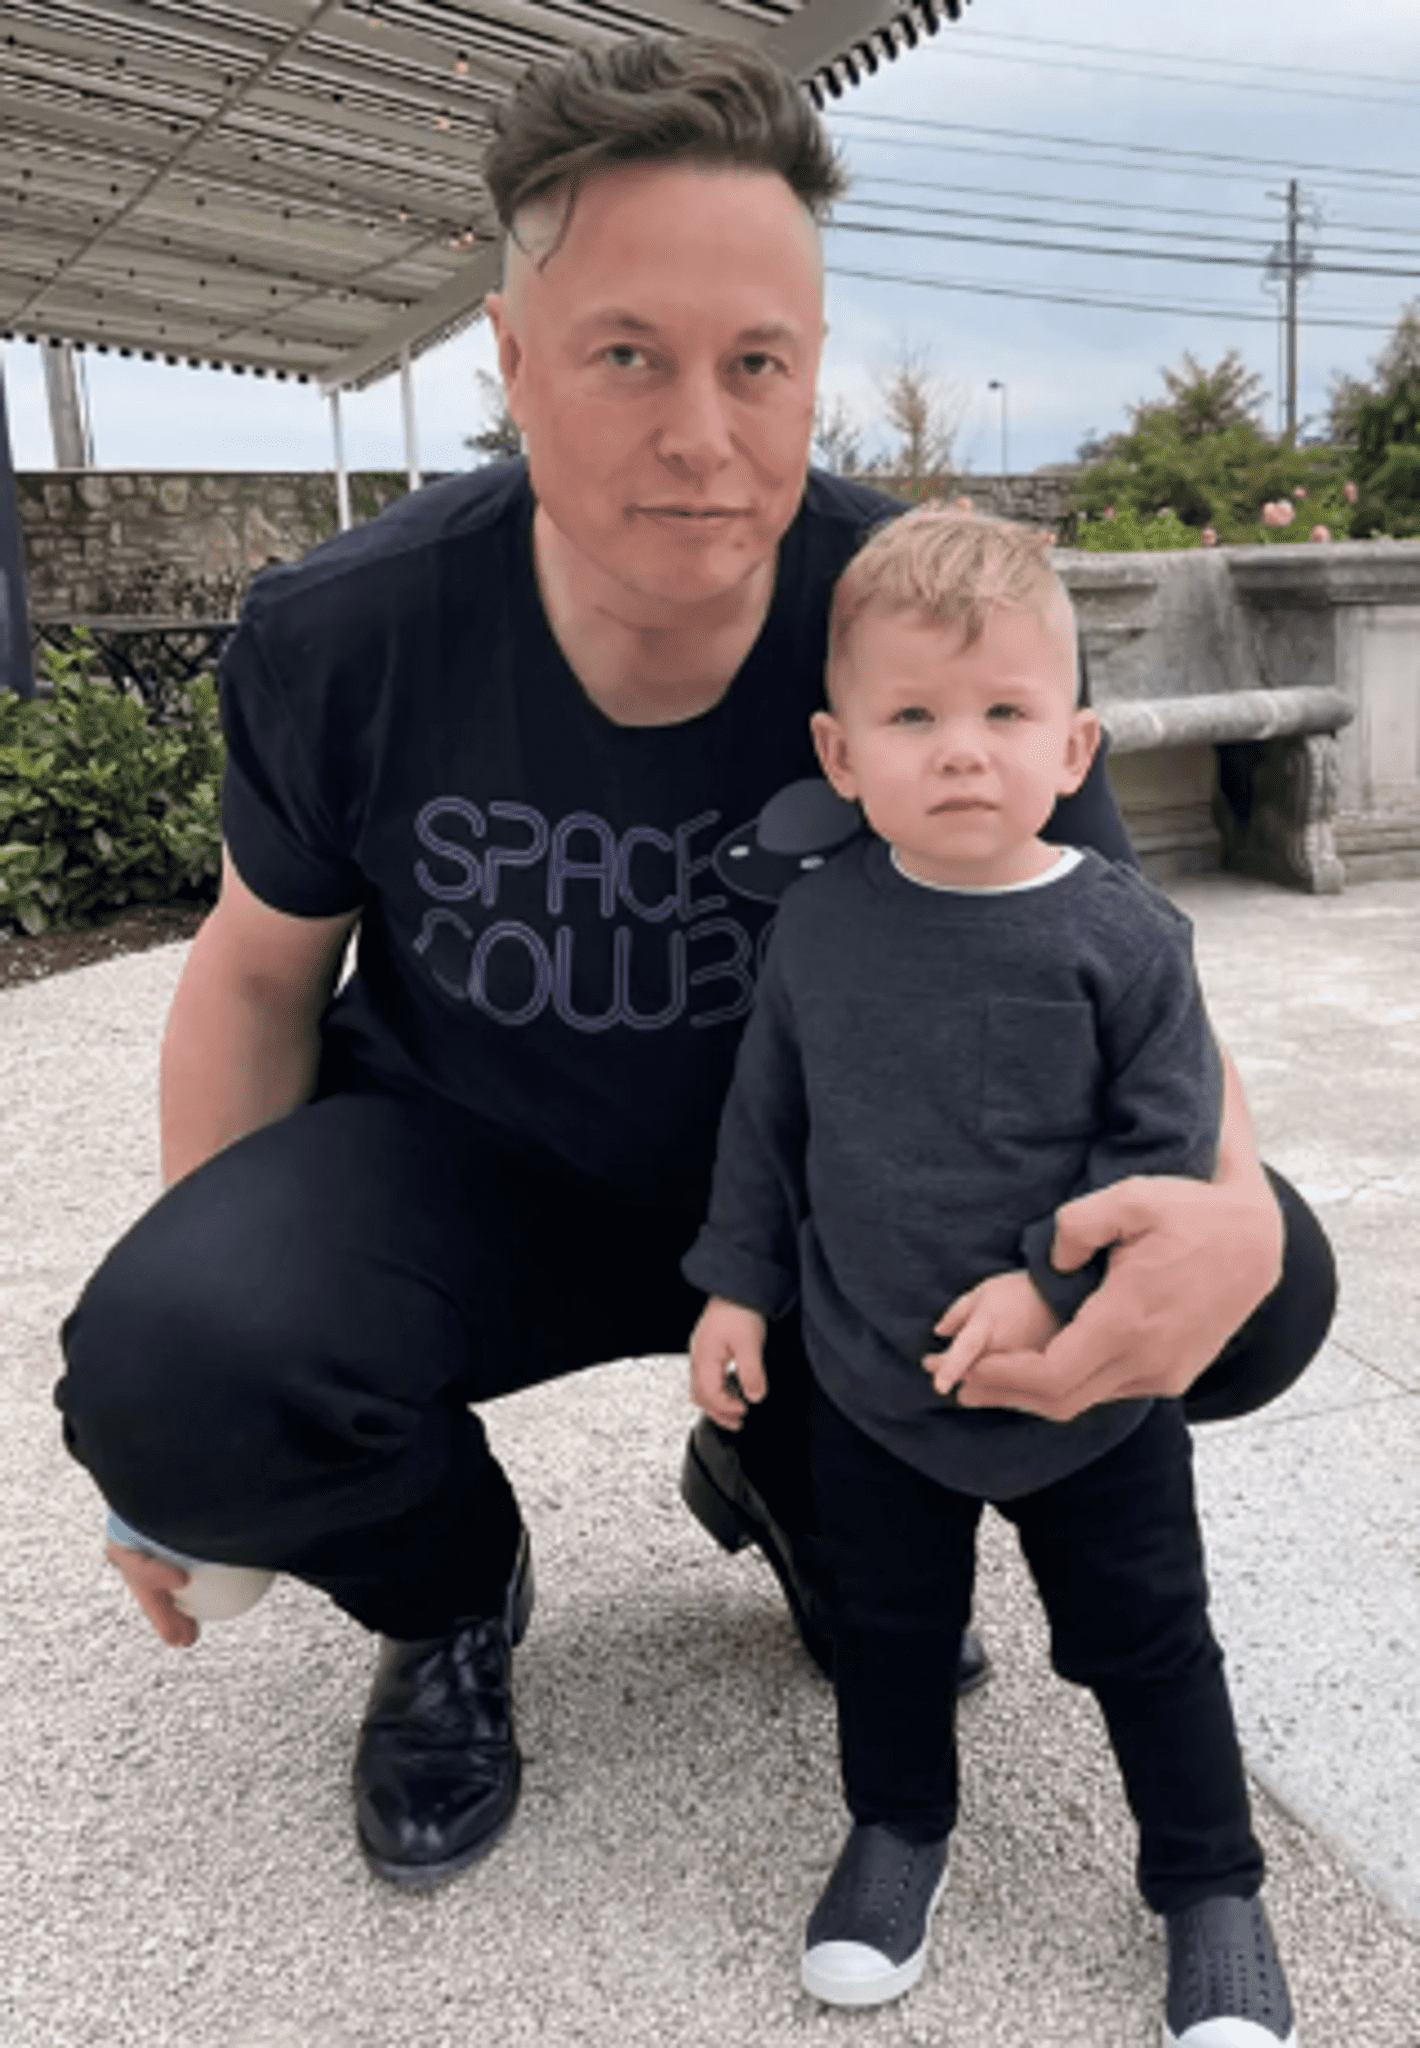 In A Throwback Thanksgiving Picture, Elon Musk Admits That He Cuts His Own Hair And That Of His Son X AE A-XII Musk